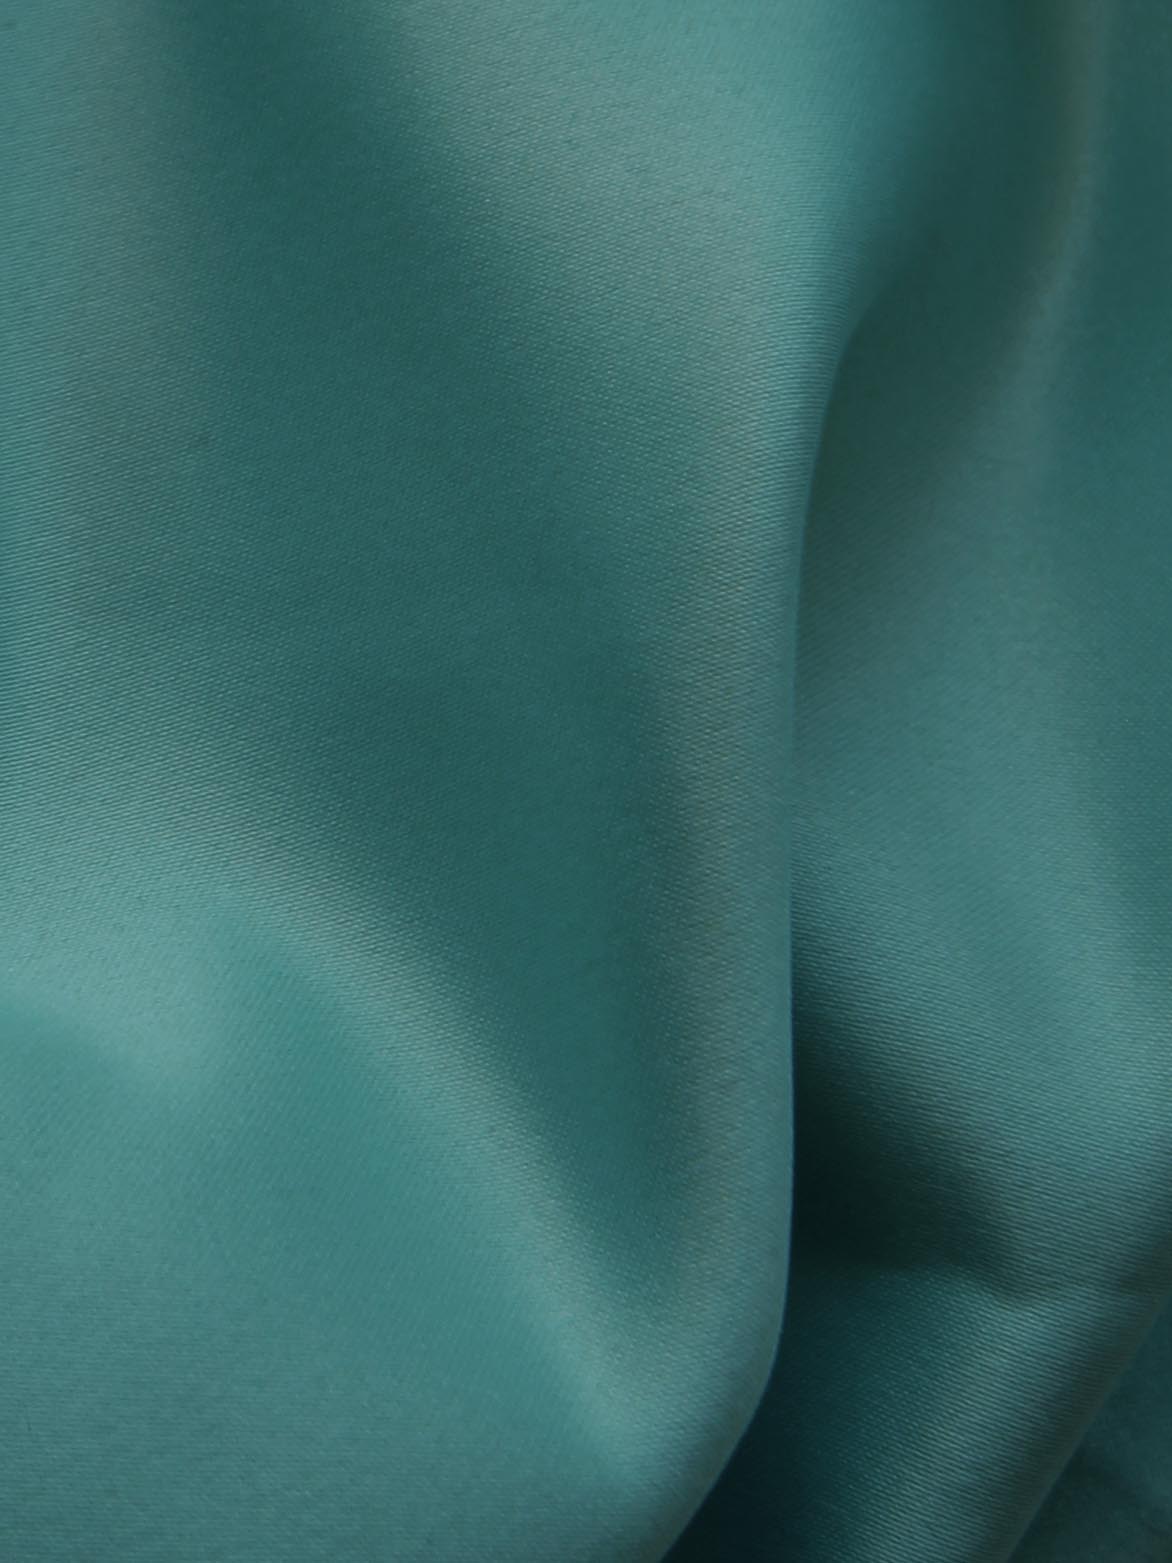 Teal Polyester Satin - Majestic